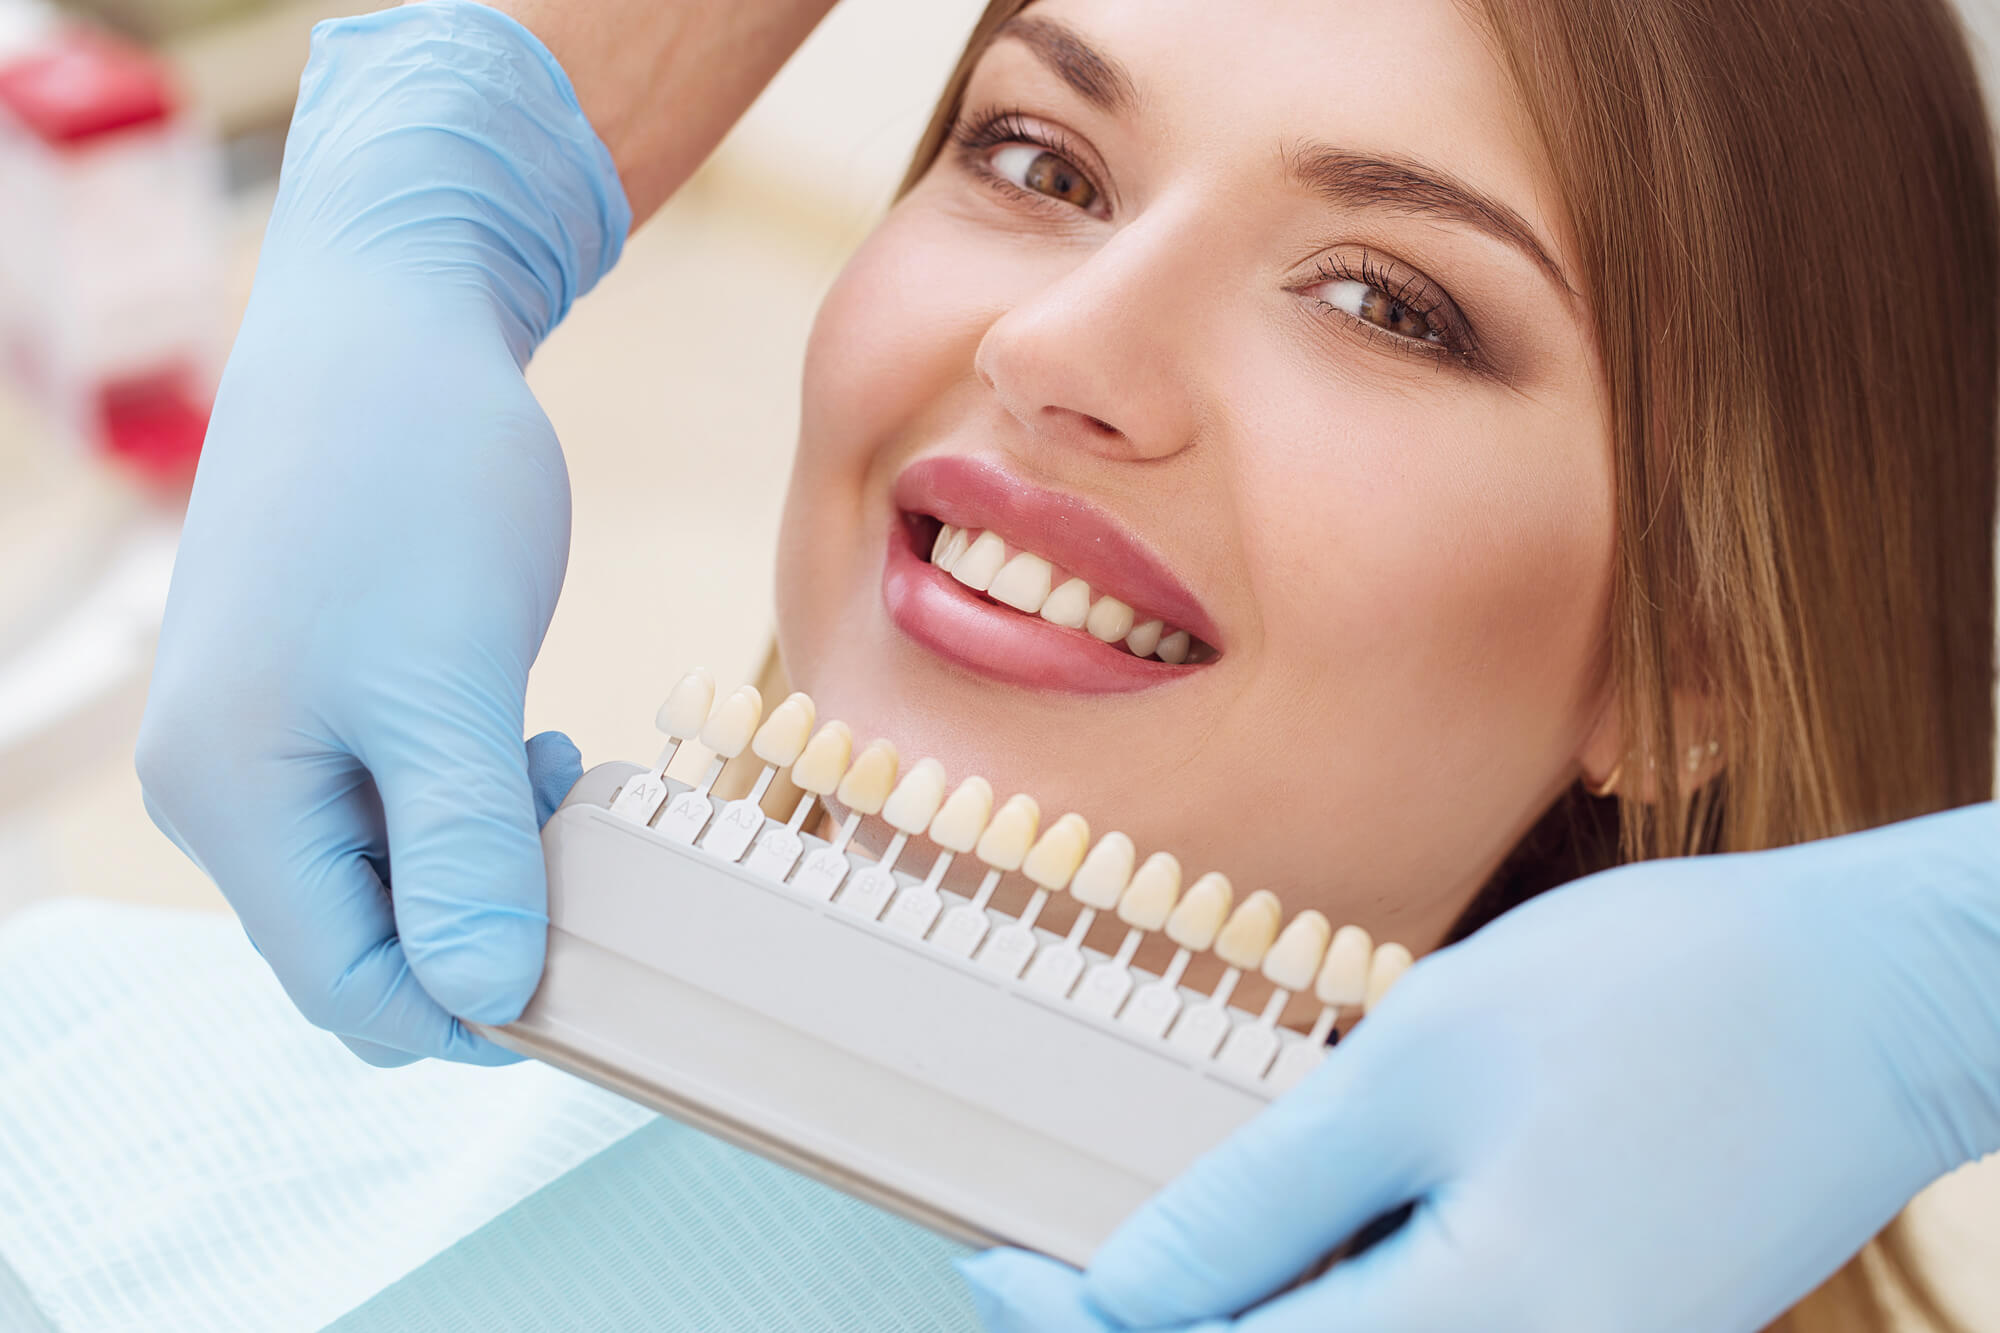 cosmetic dentist finding the perfect dental crown Wendell color for the patient